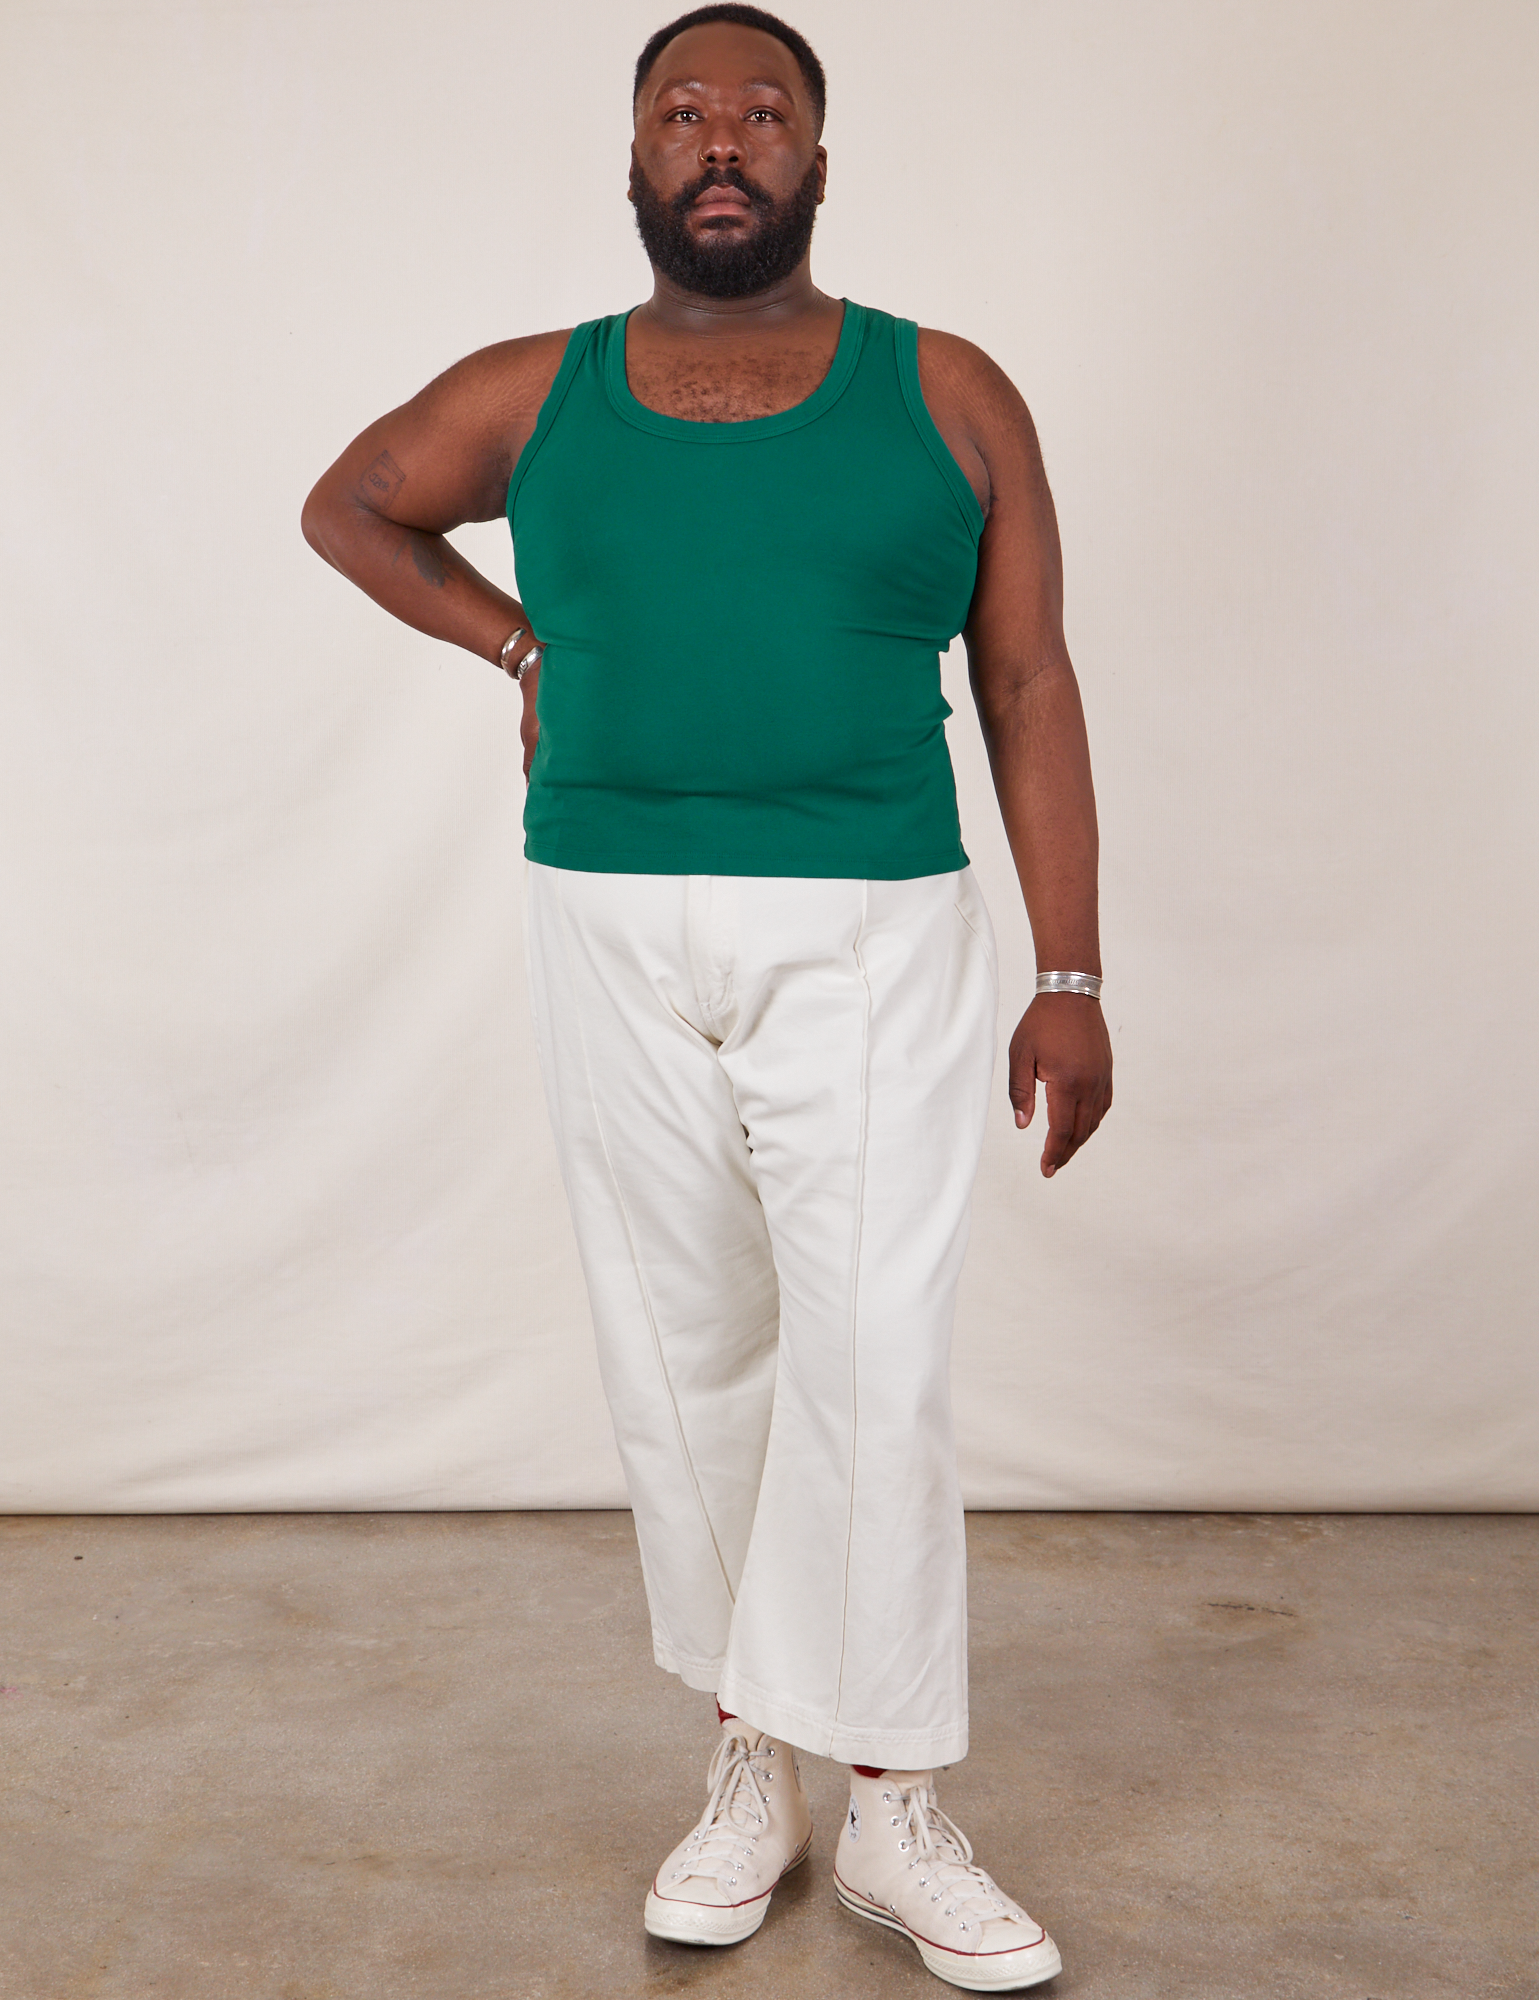 Elijah is 6’0 and wearing 3XL Tank Top in Hunter Green paired with vintage tee off-white Western Pants